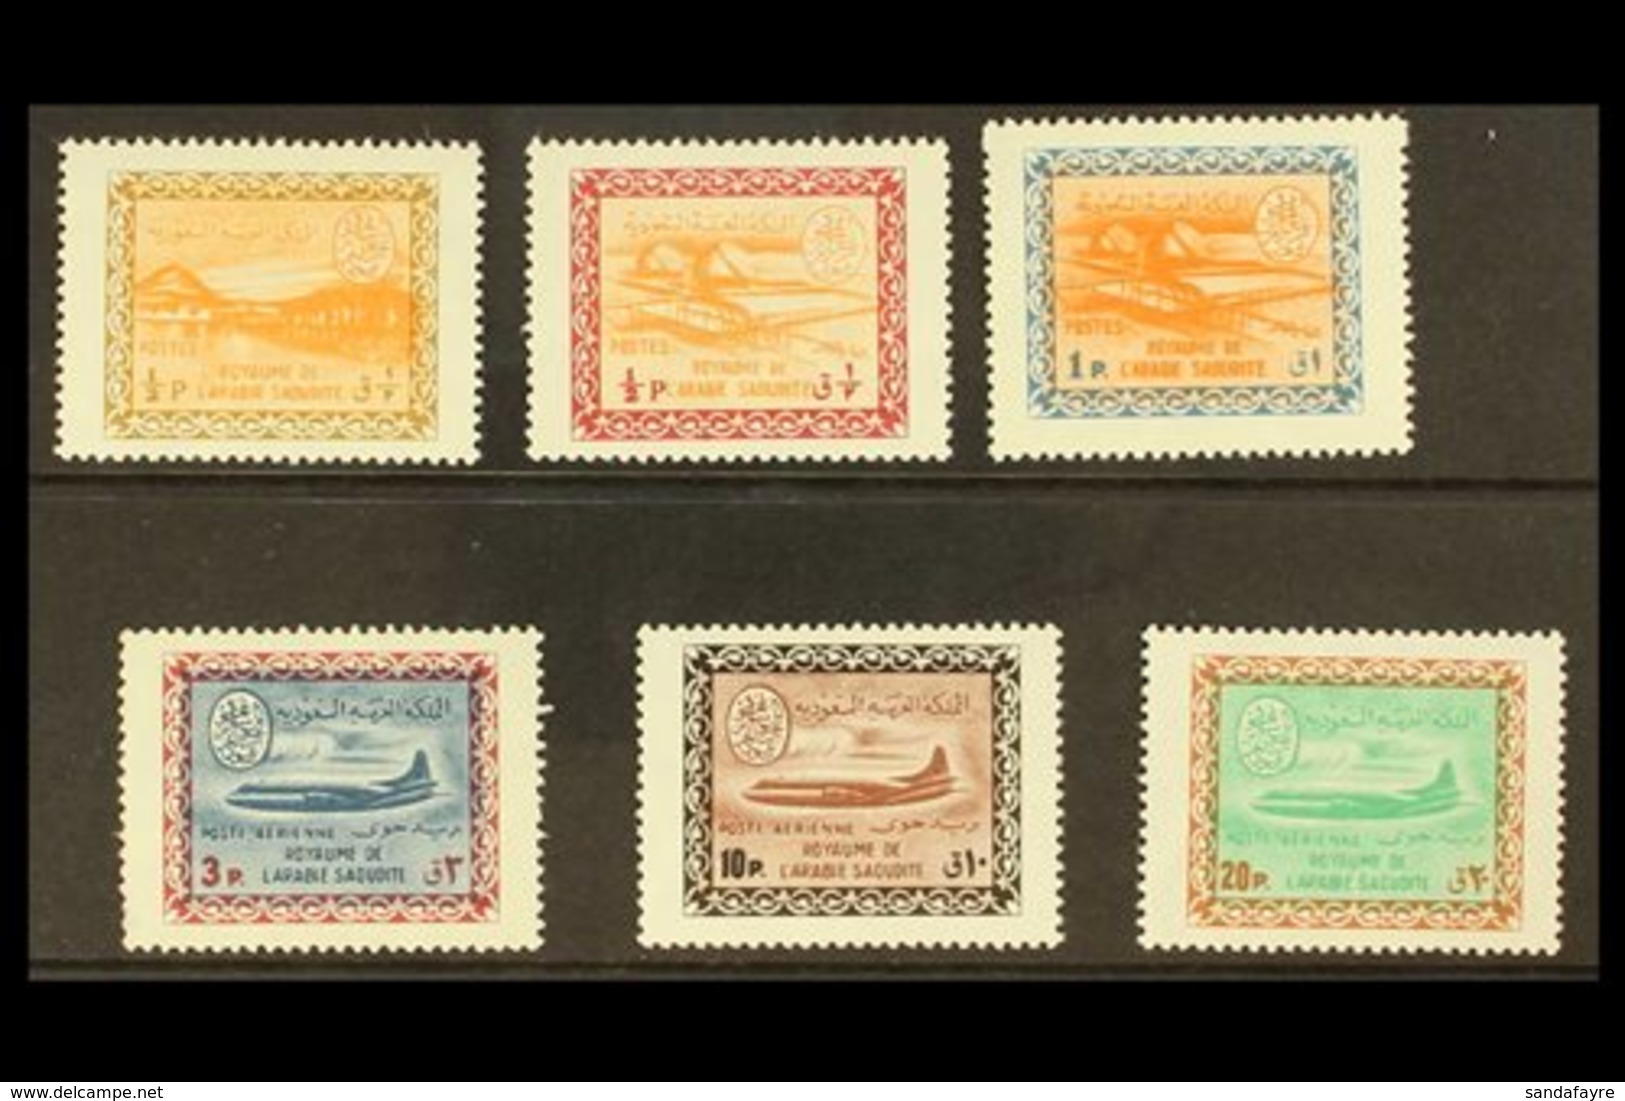 1963  Complete Set, Redrawn In Larger Format, SG 487/92, Very Fine Never Hinged Mint. (6 Stamps) For More Images, Please - Saudi Arabia